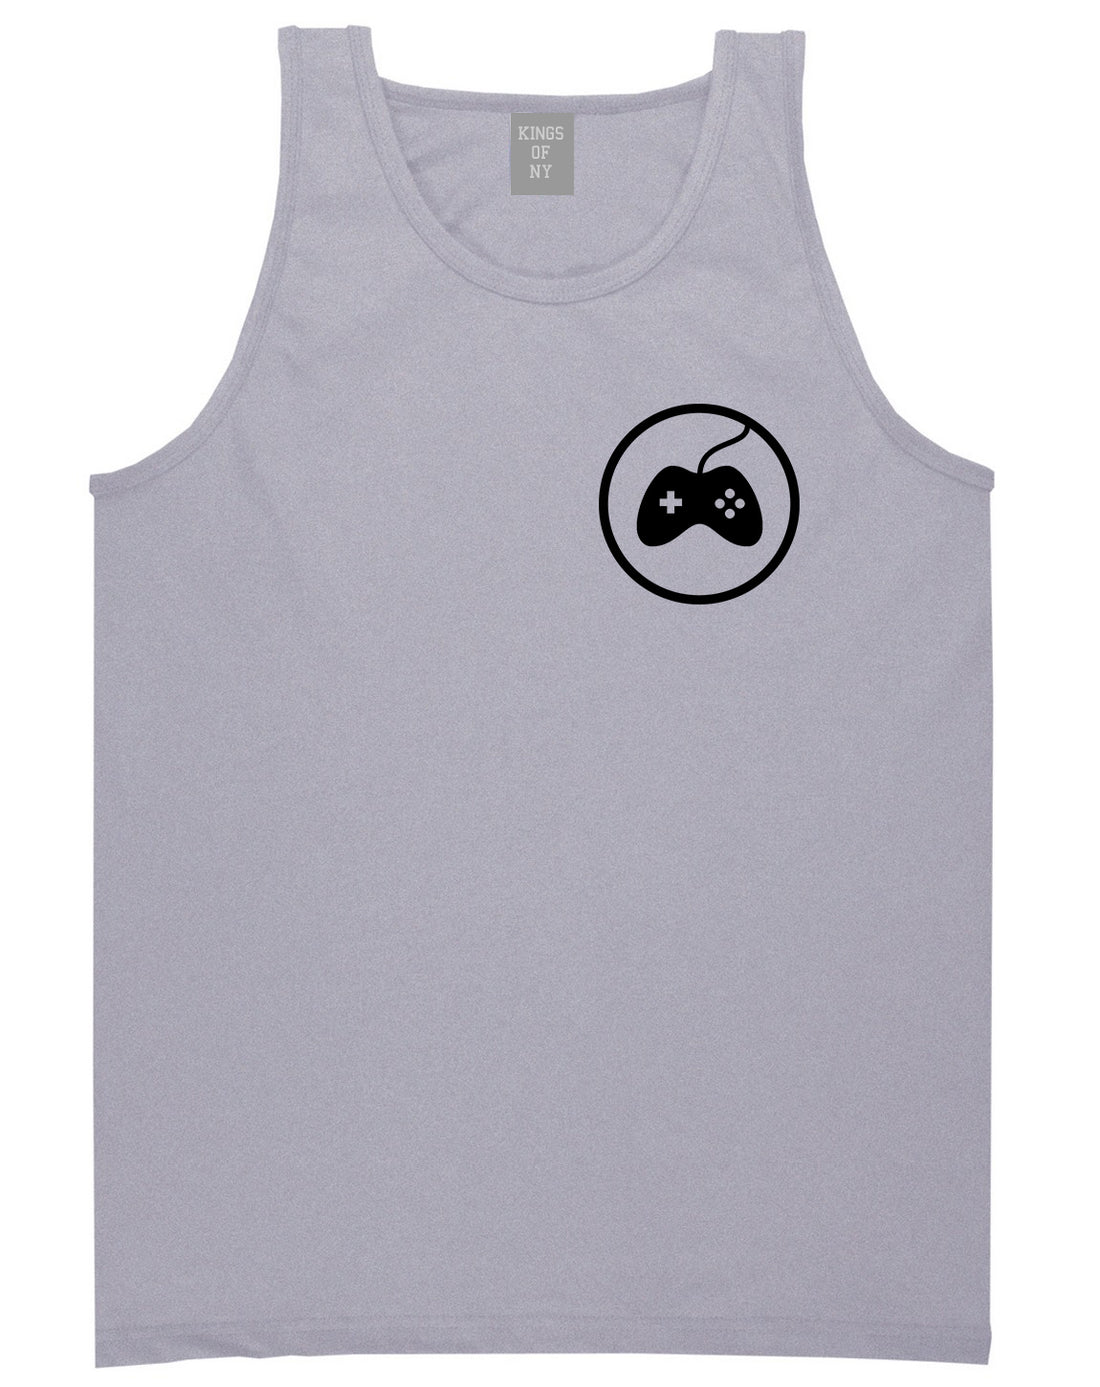 Gaming Game Controller Chest Mens Grey Tank Top Shirt by KINGS OF NY